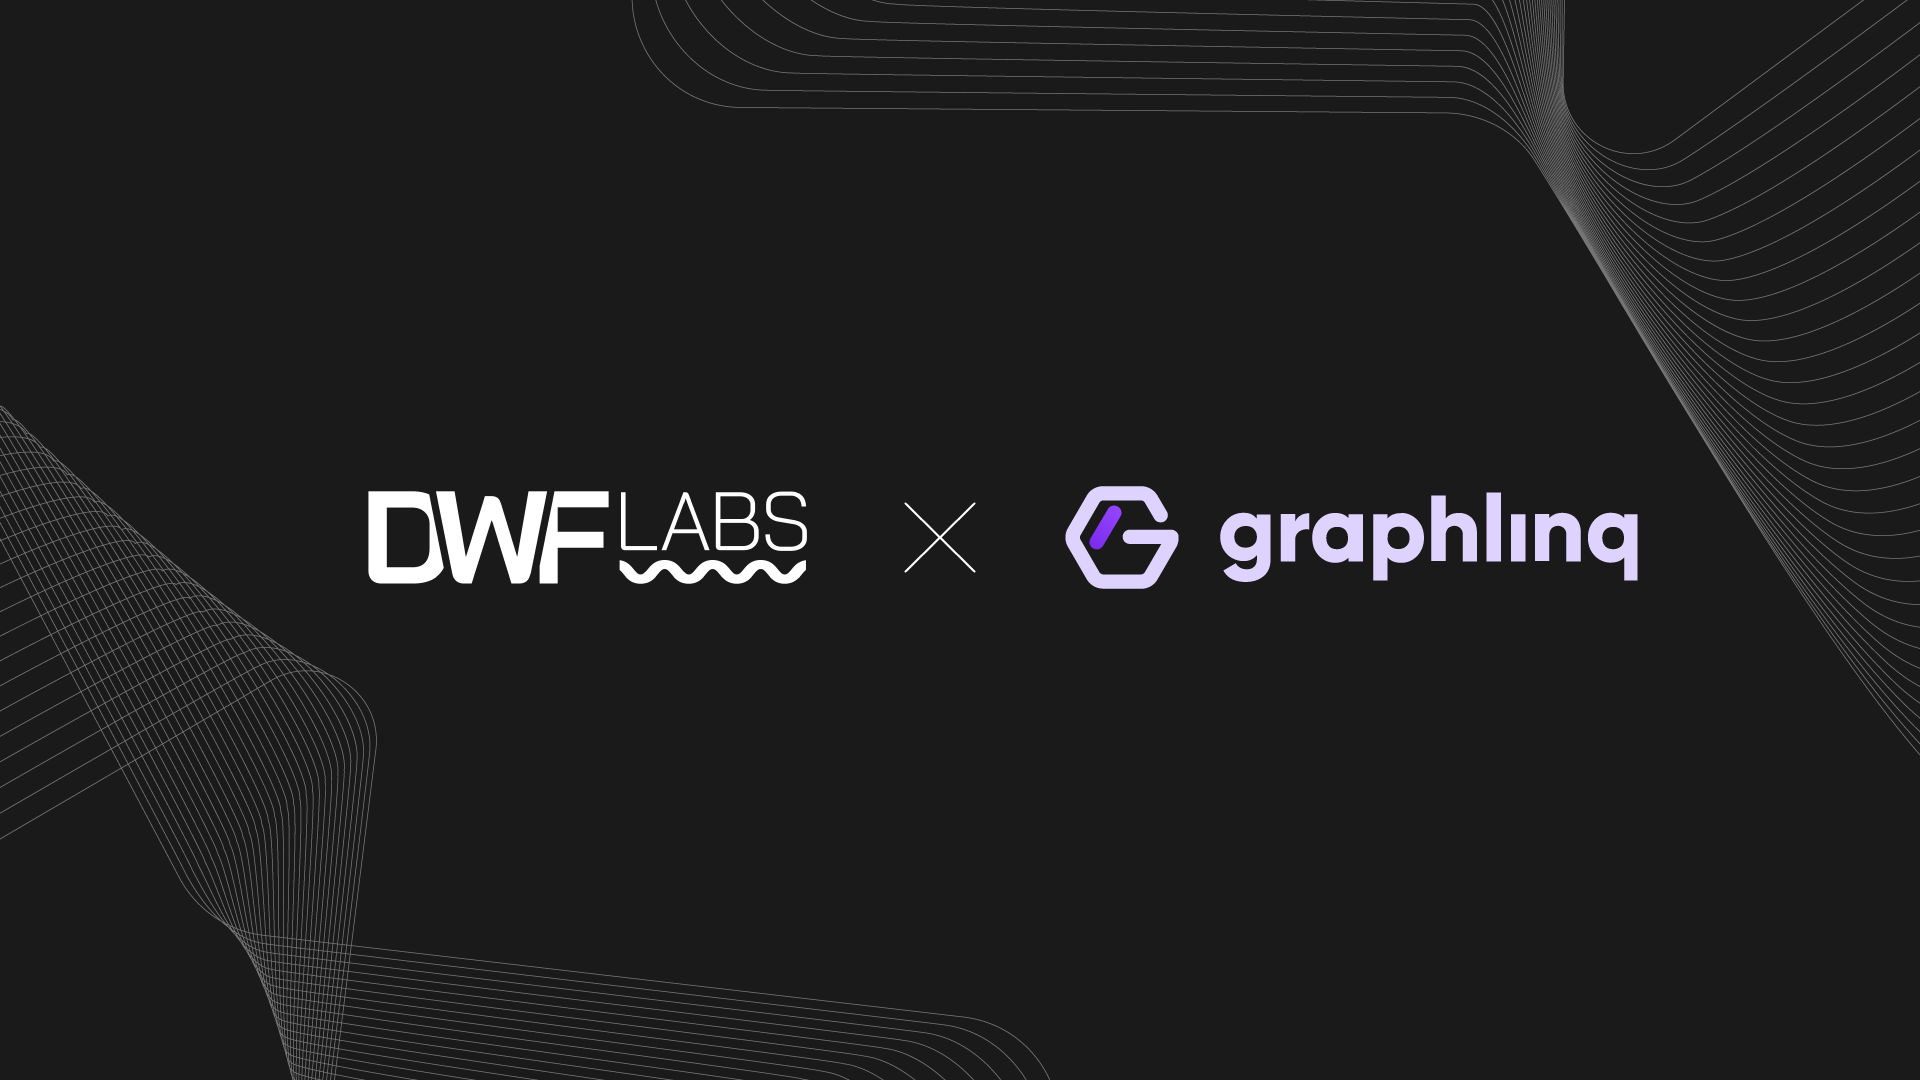 GraphLinq Secures Investment from DWF Labs to Expand Ecosystem